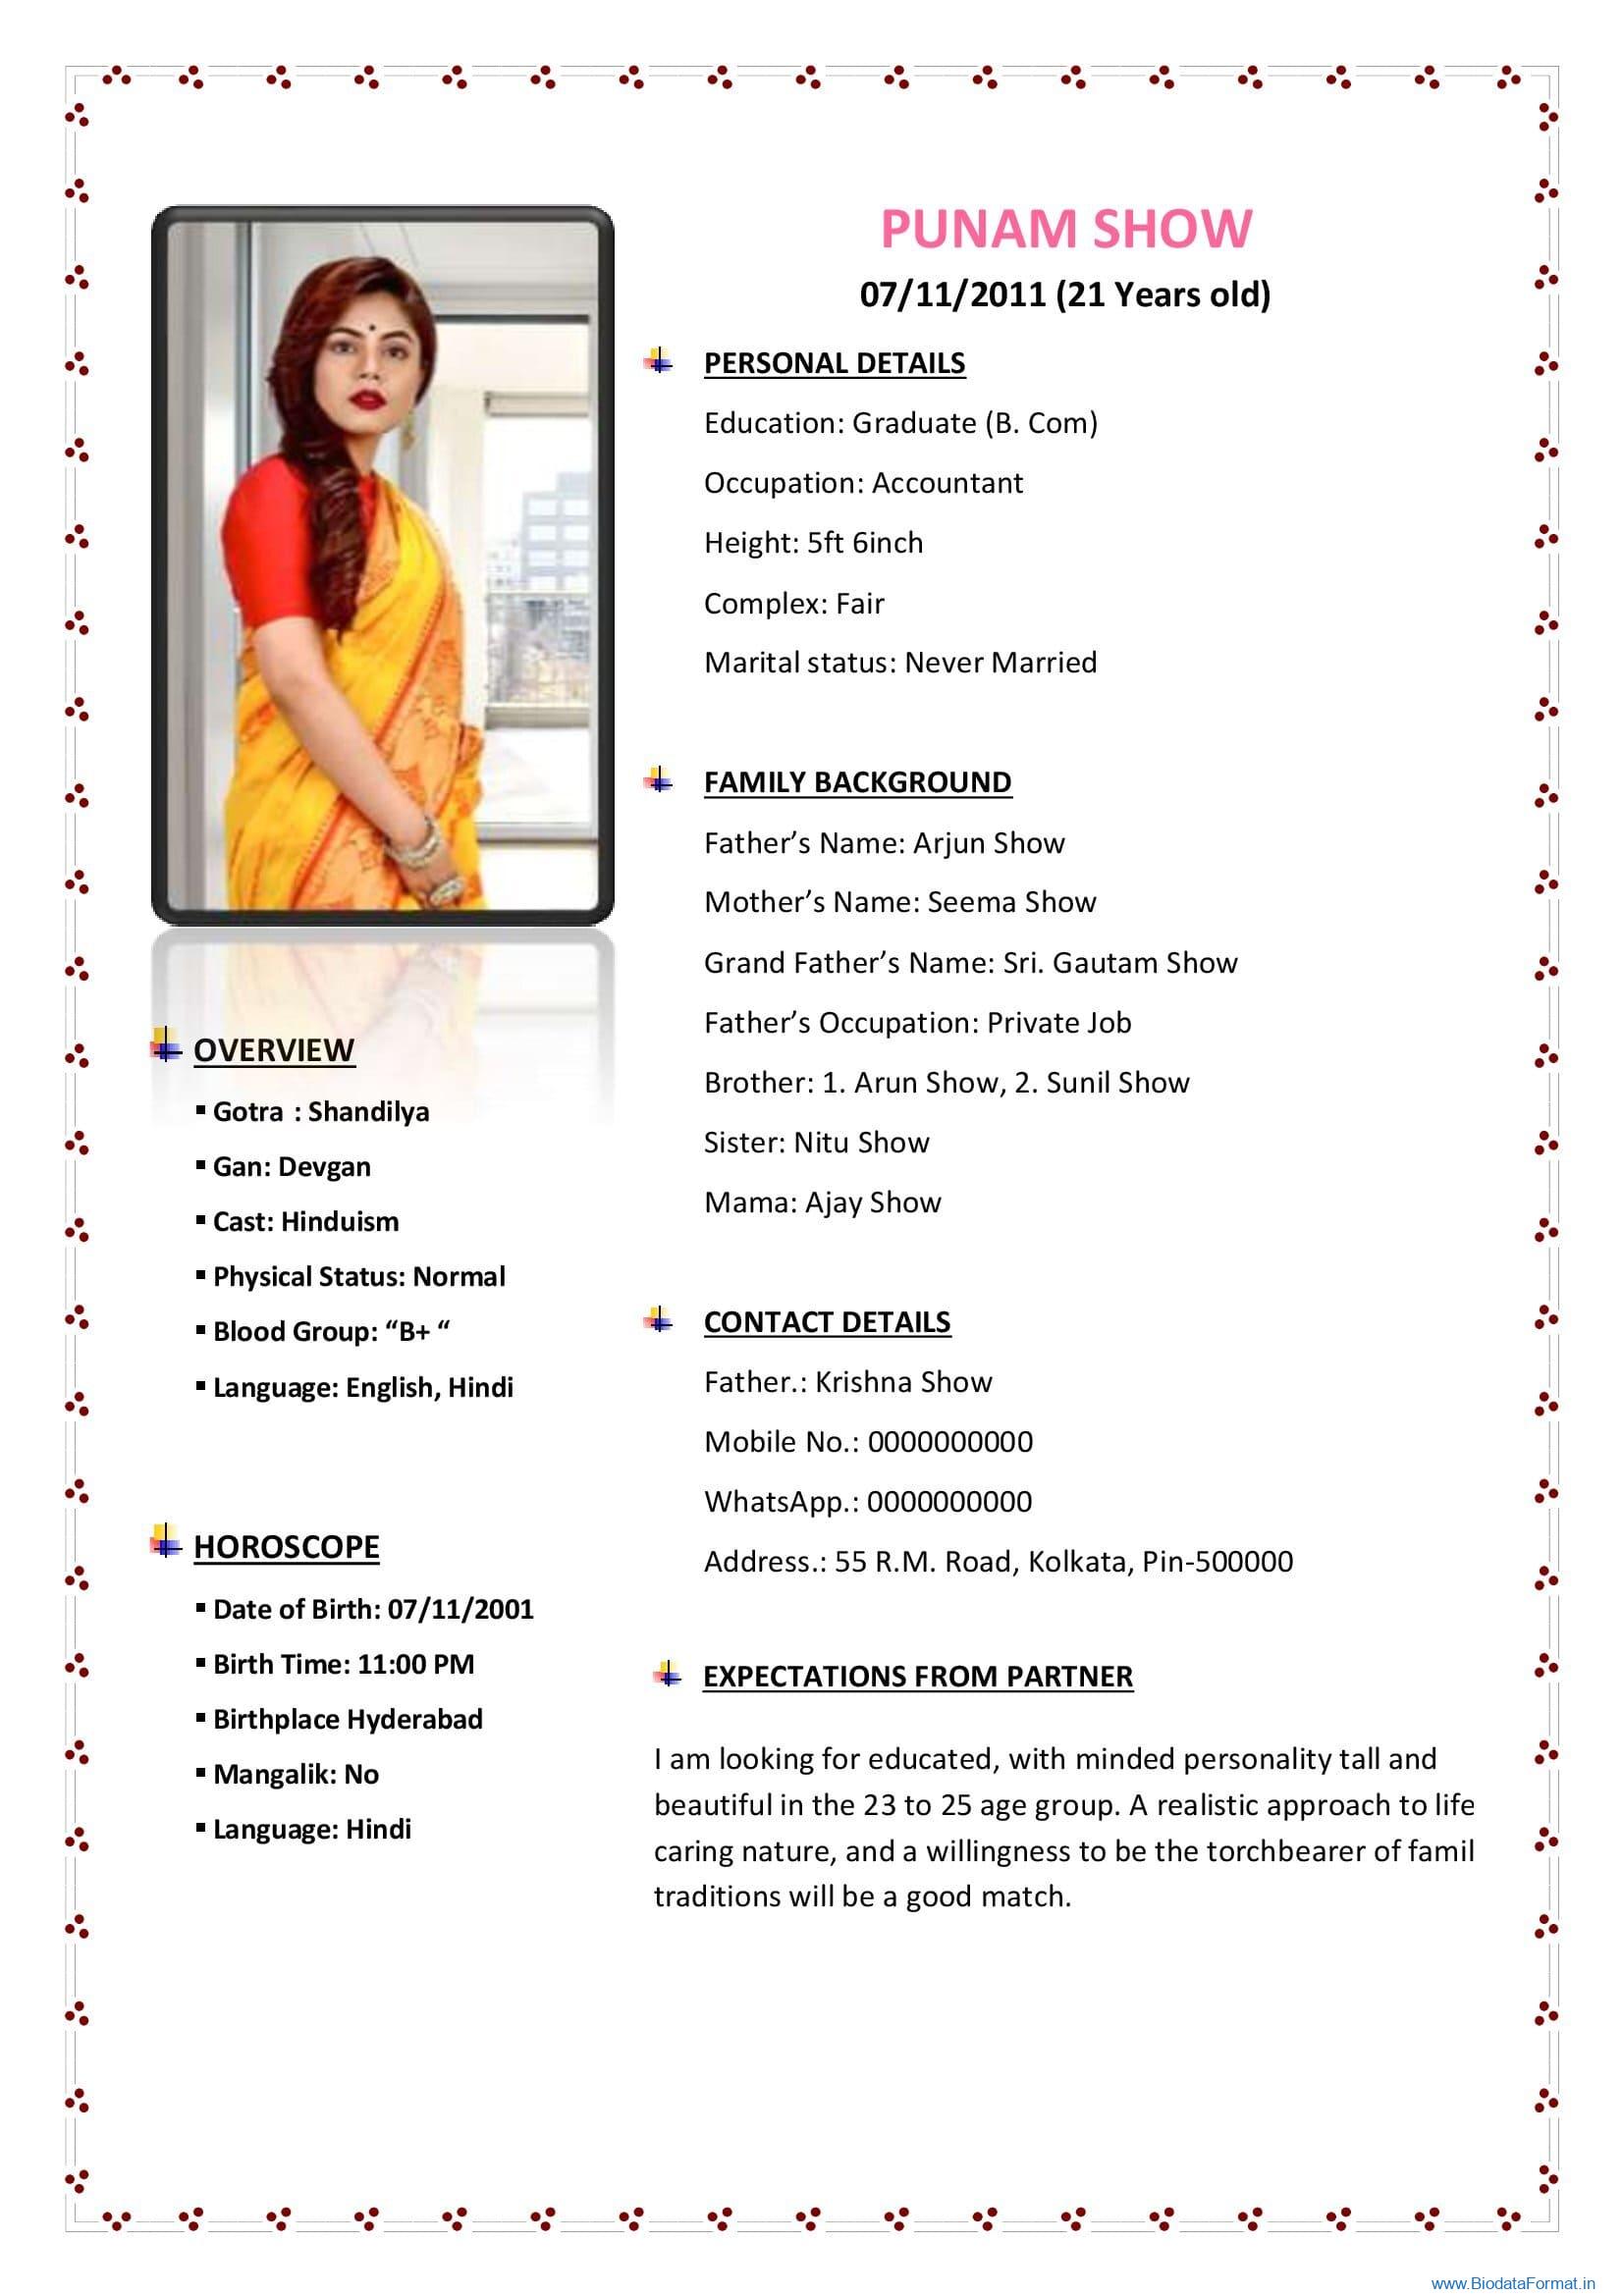 New Marriage Biodata format for girls with big photo - BiodataFormat.in